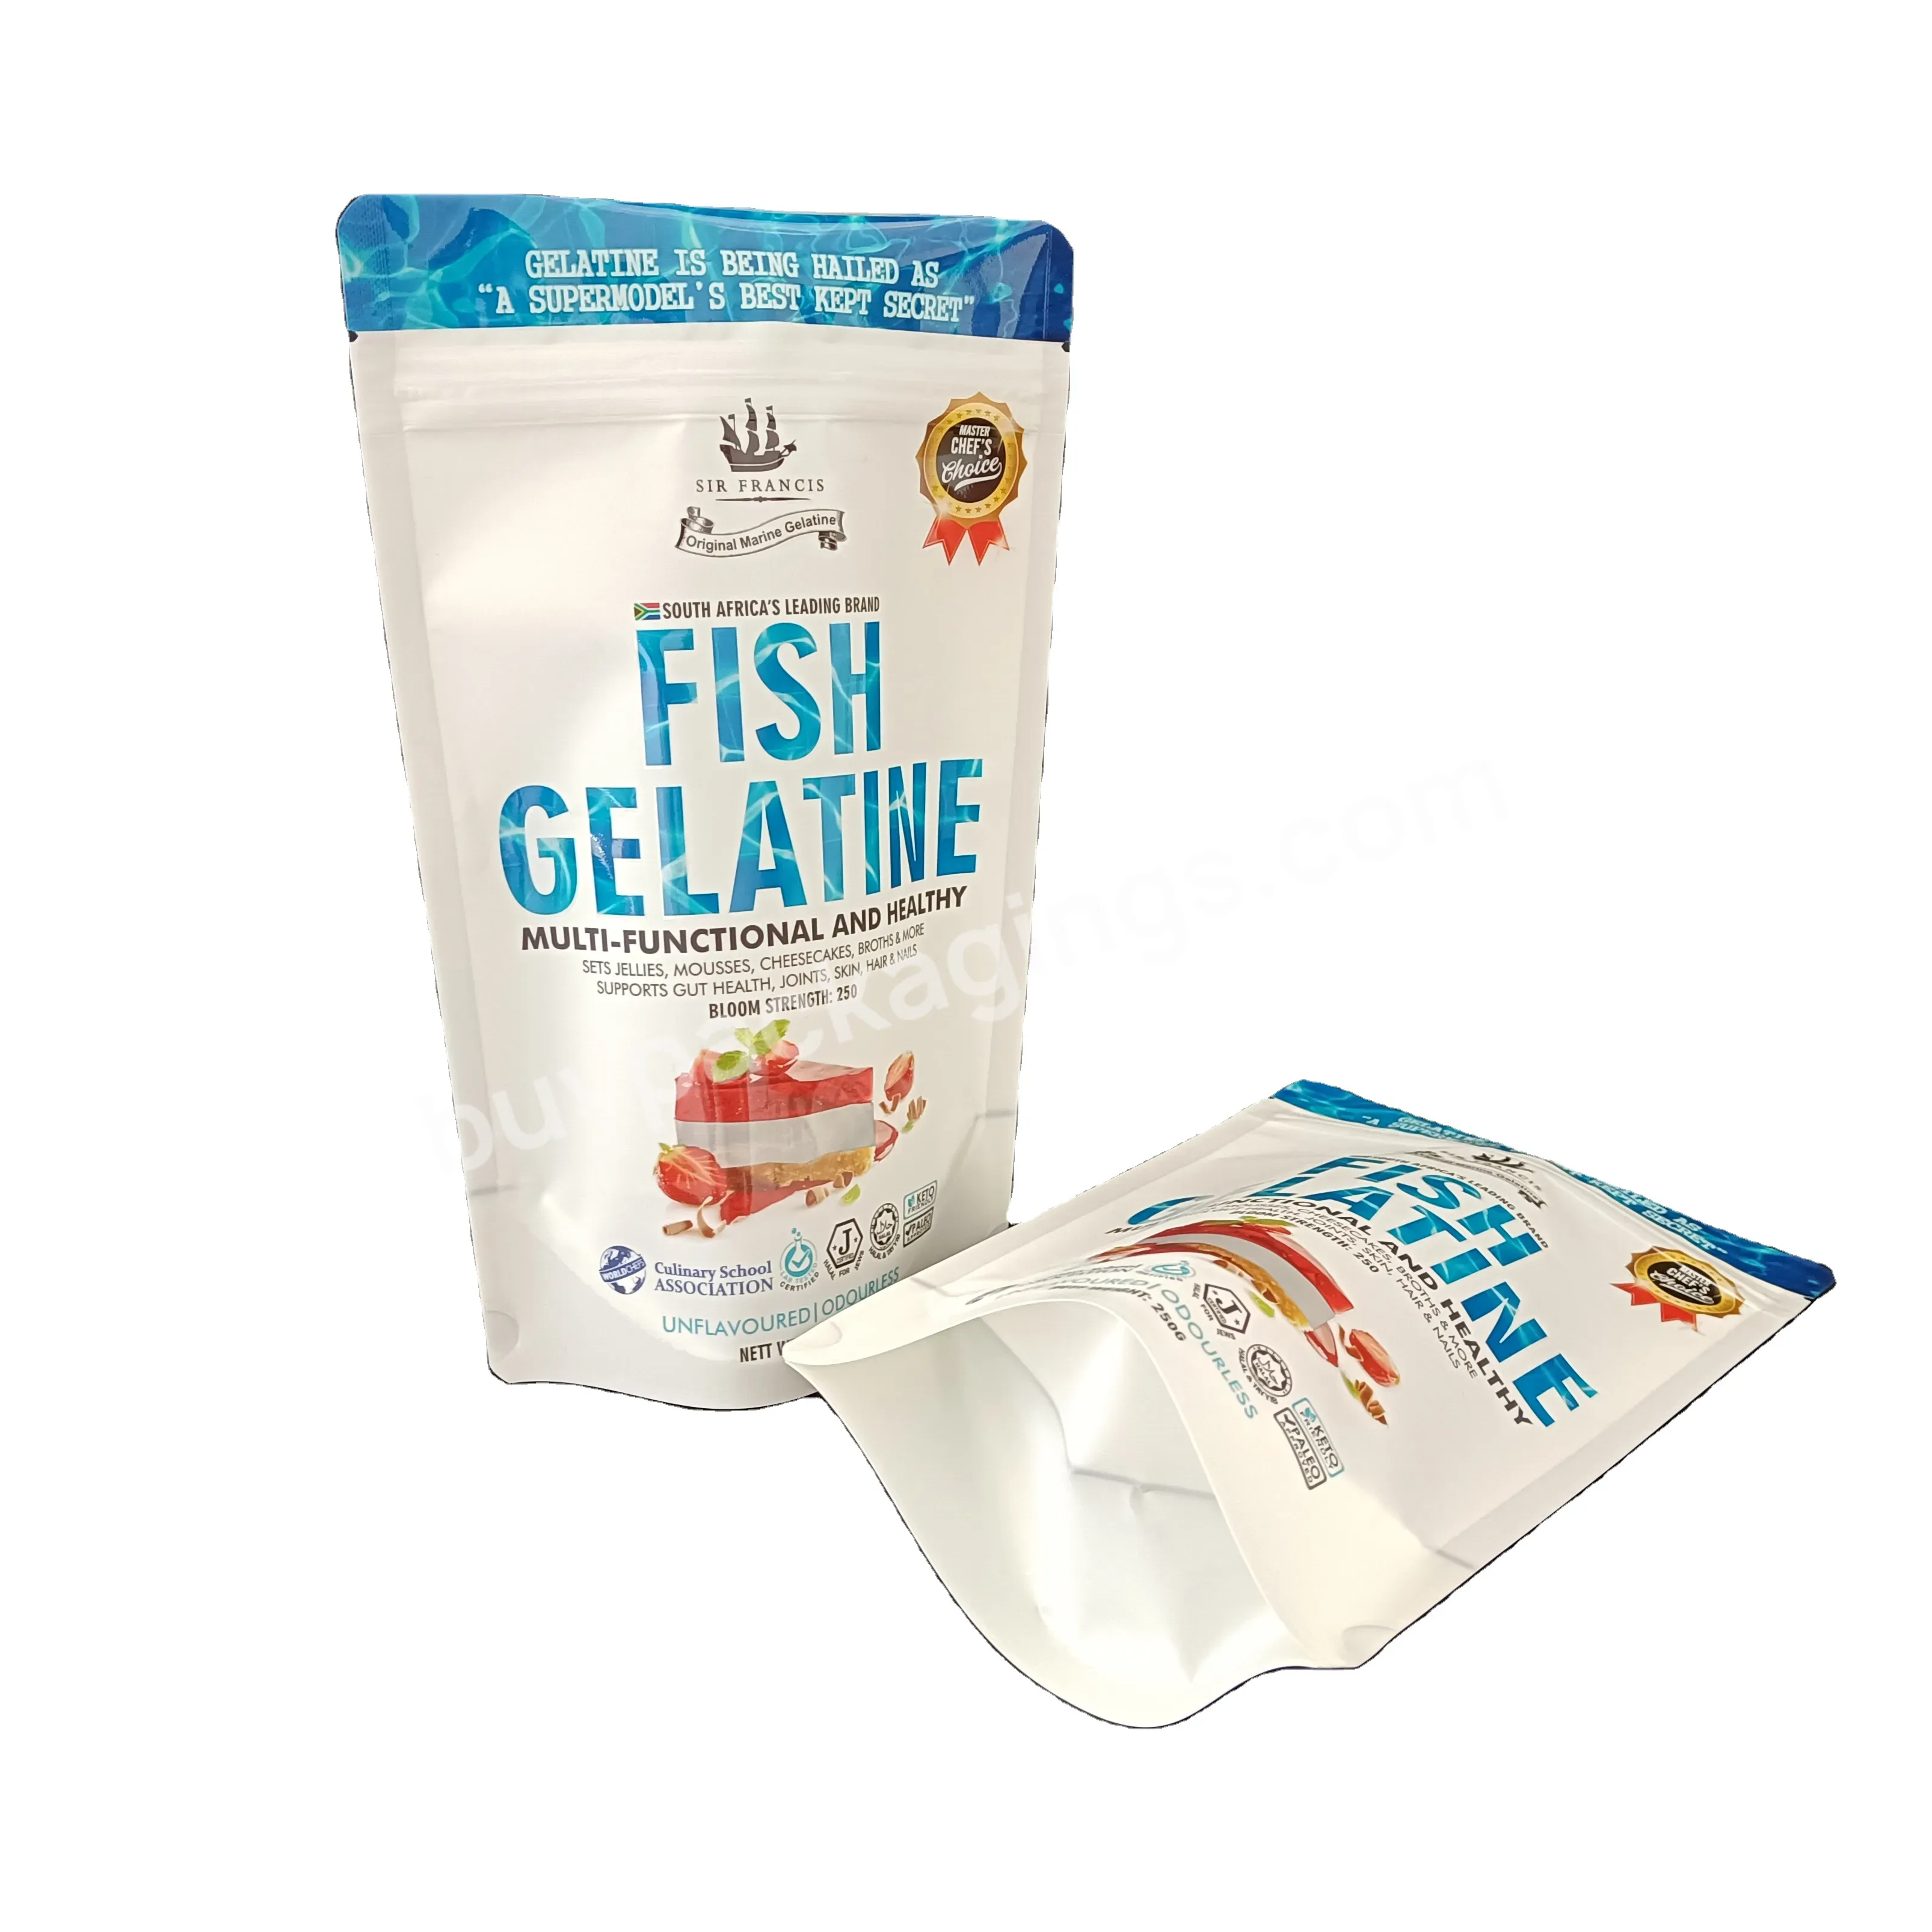 Edibles Proof Custom Printed Holographic Aluminum Foil Mylar Bag Stand Up Pouch For Marine Fish Collagen Packaging Bags - Buy Holographic Packaging Bags,Aluminum Foil Mylar Bag,Marine Fish Collagen Packaging Bags.